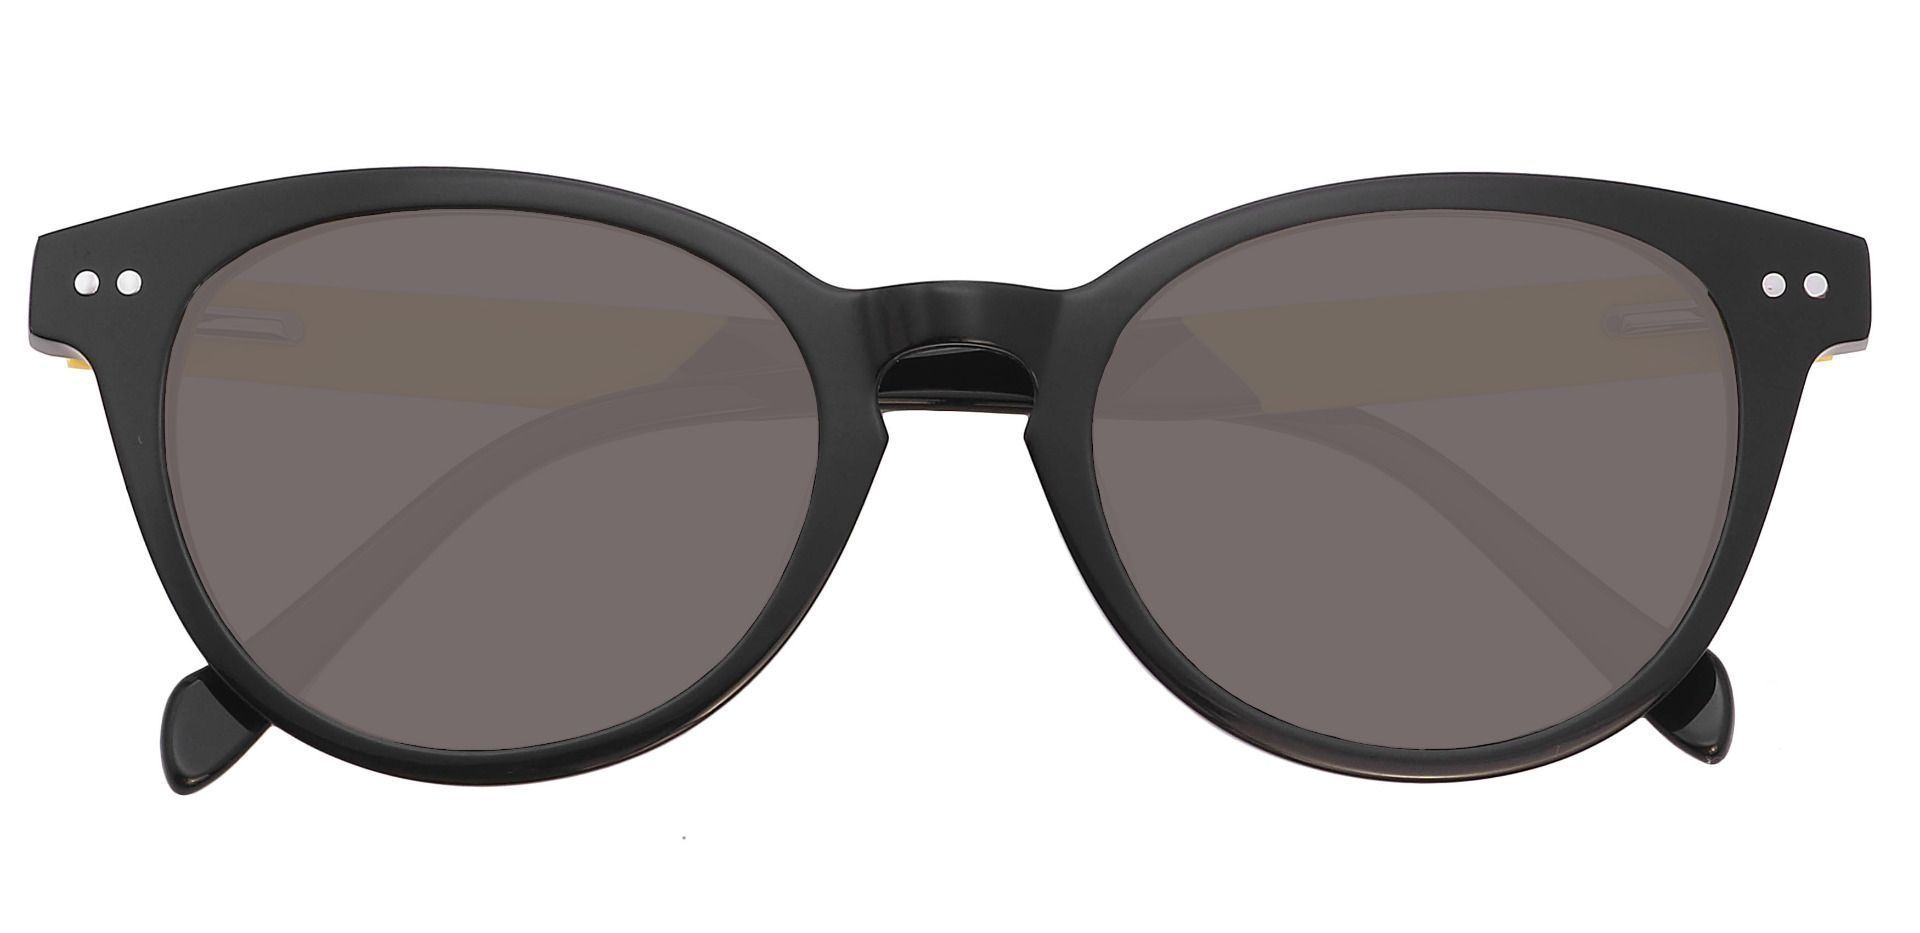 Forbes Oval Non-Rx Sunglasses - Black Frame With Gray Lenses